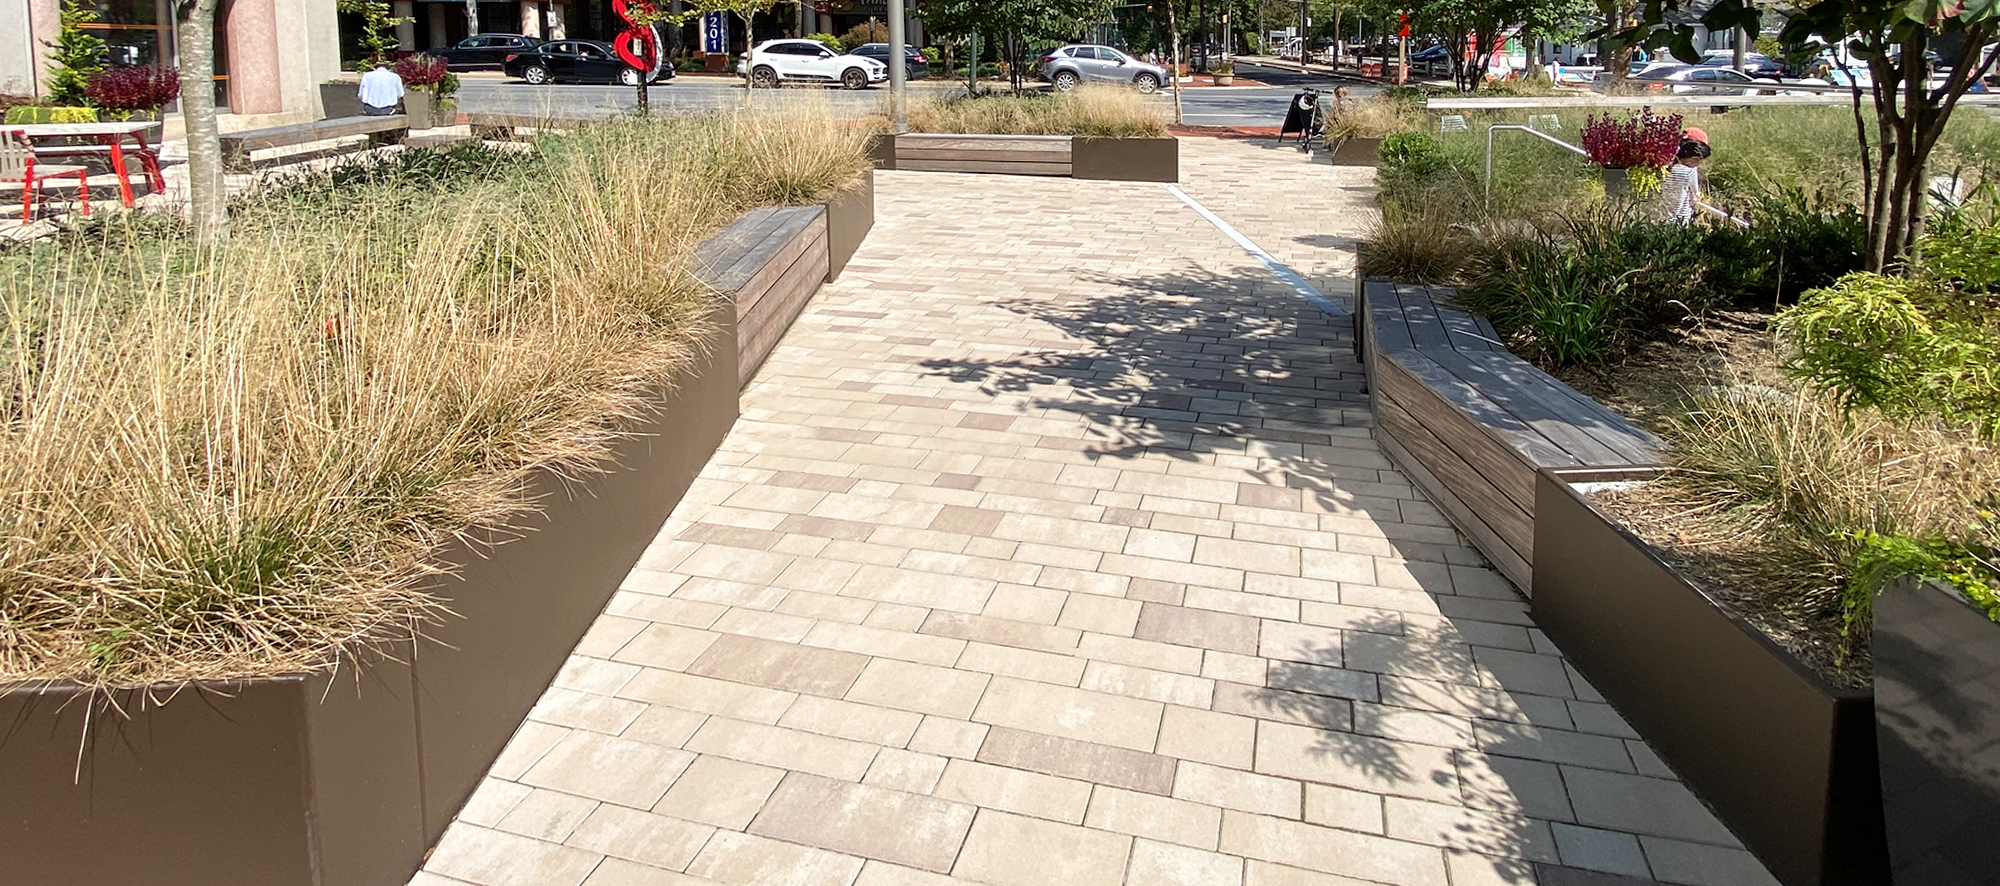 A pedestrian plaza made with Unilock Artline rectangular pavers in a mix of warm colors, and raised gardens lead to the street.